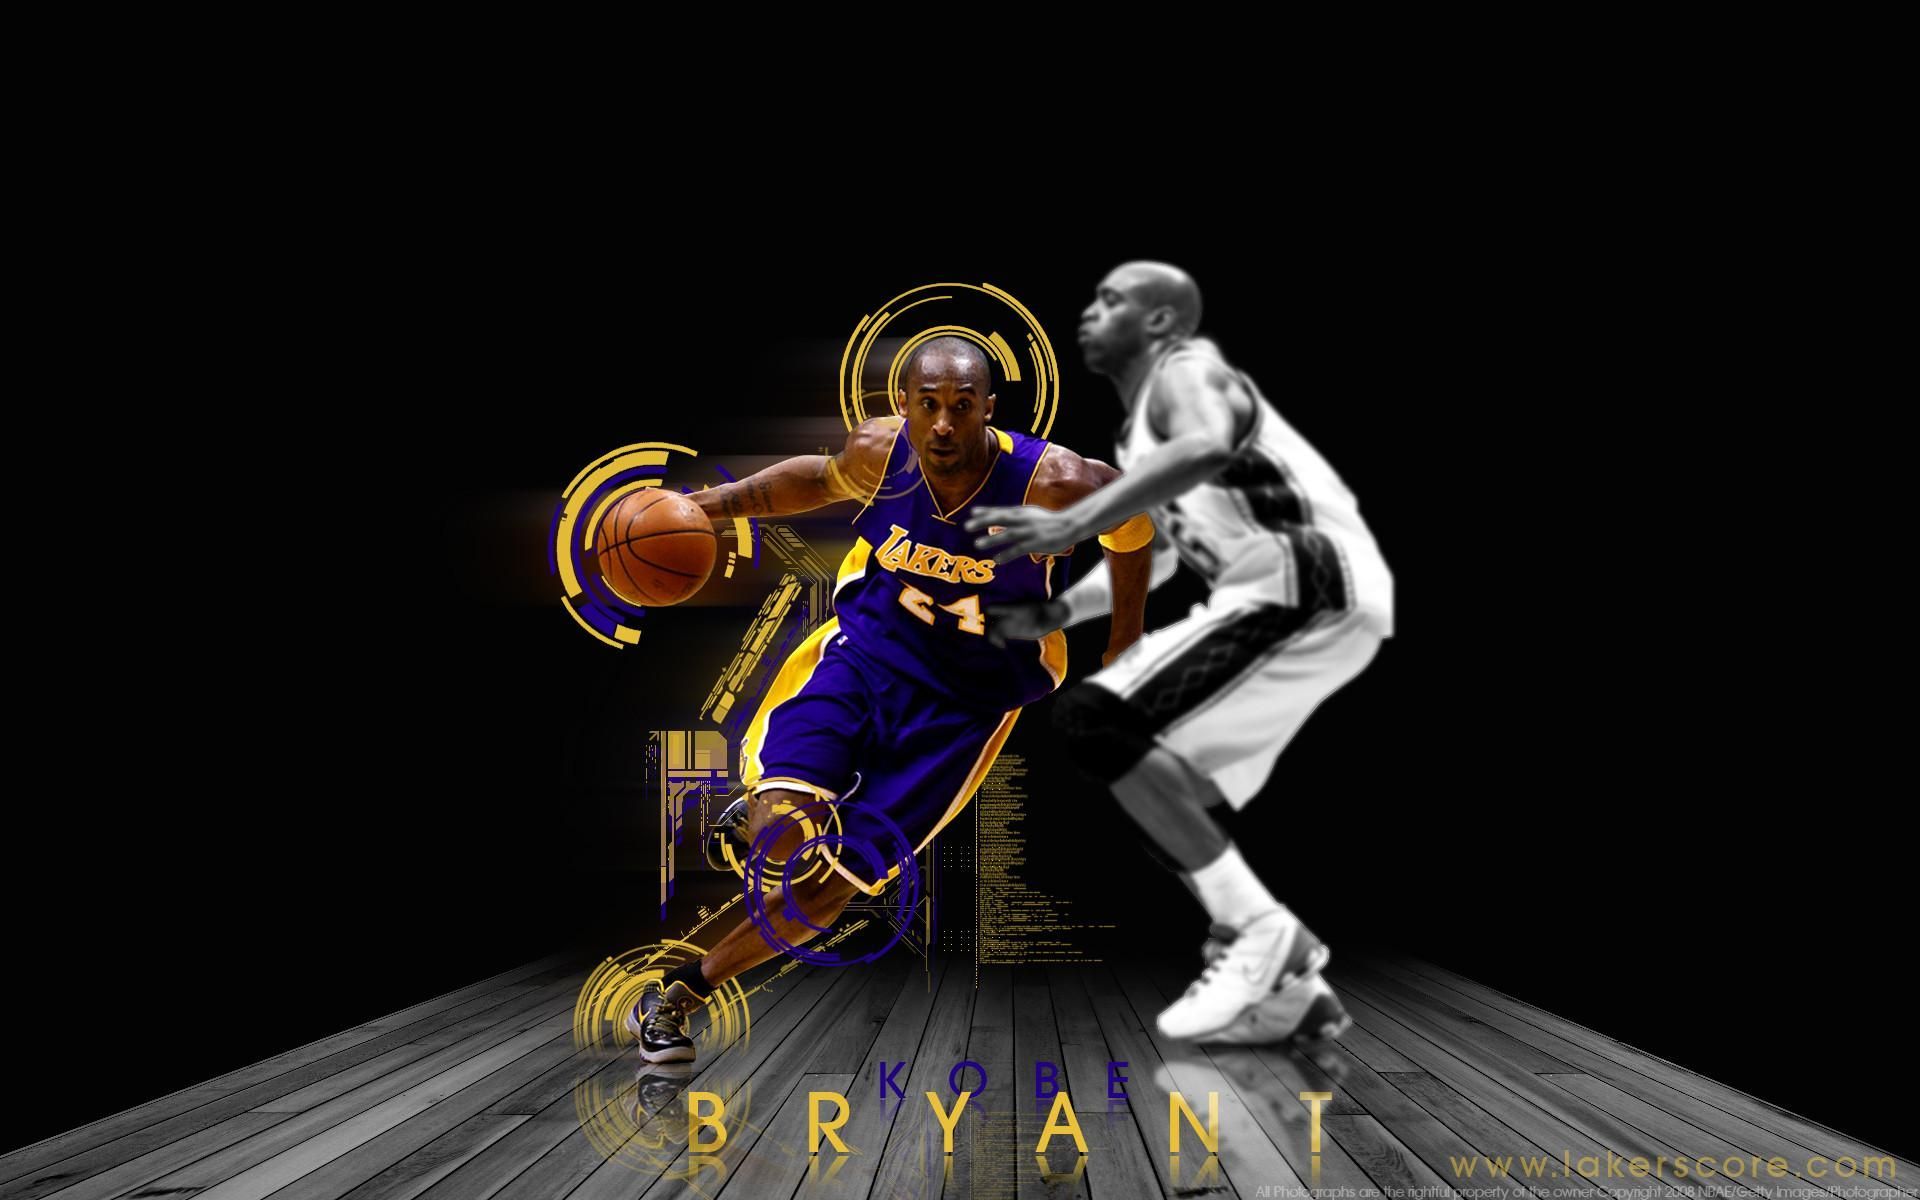 Kobe Bryant Lakers Wallpaper Hd Free Wallpapers Backgrounds Images ...